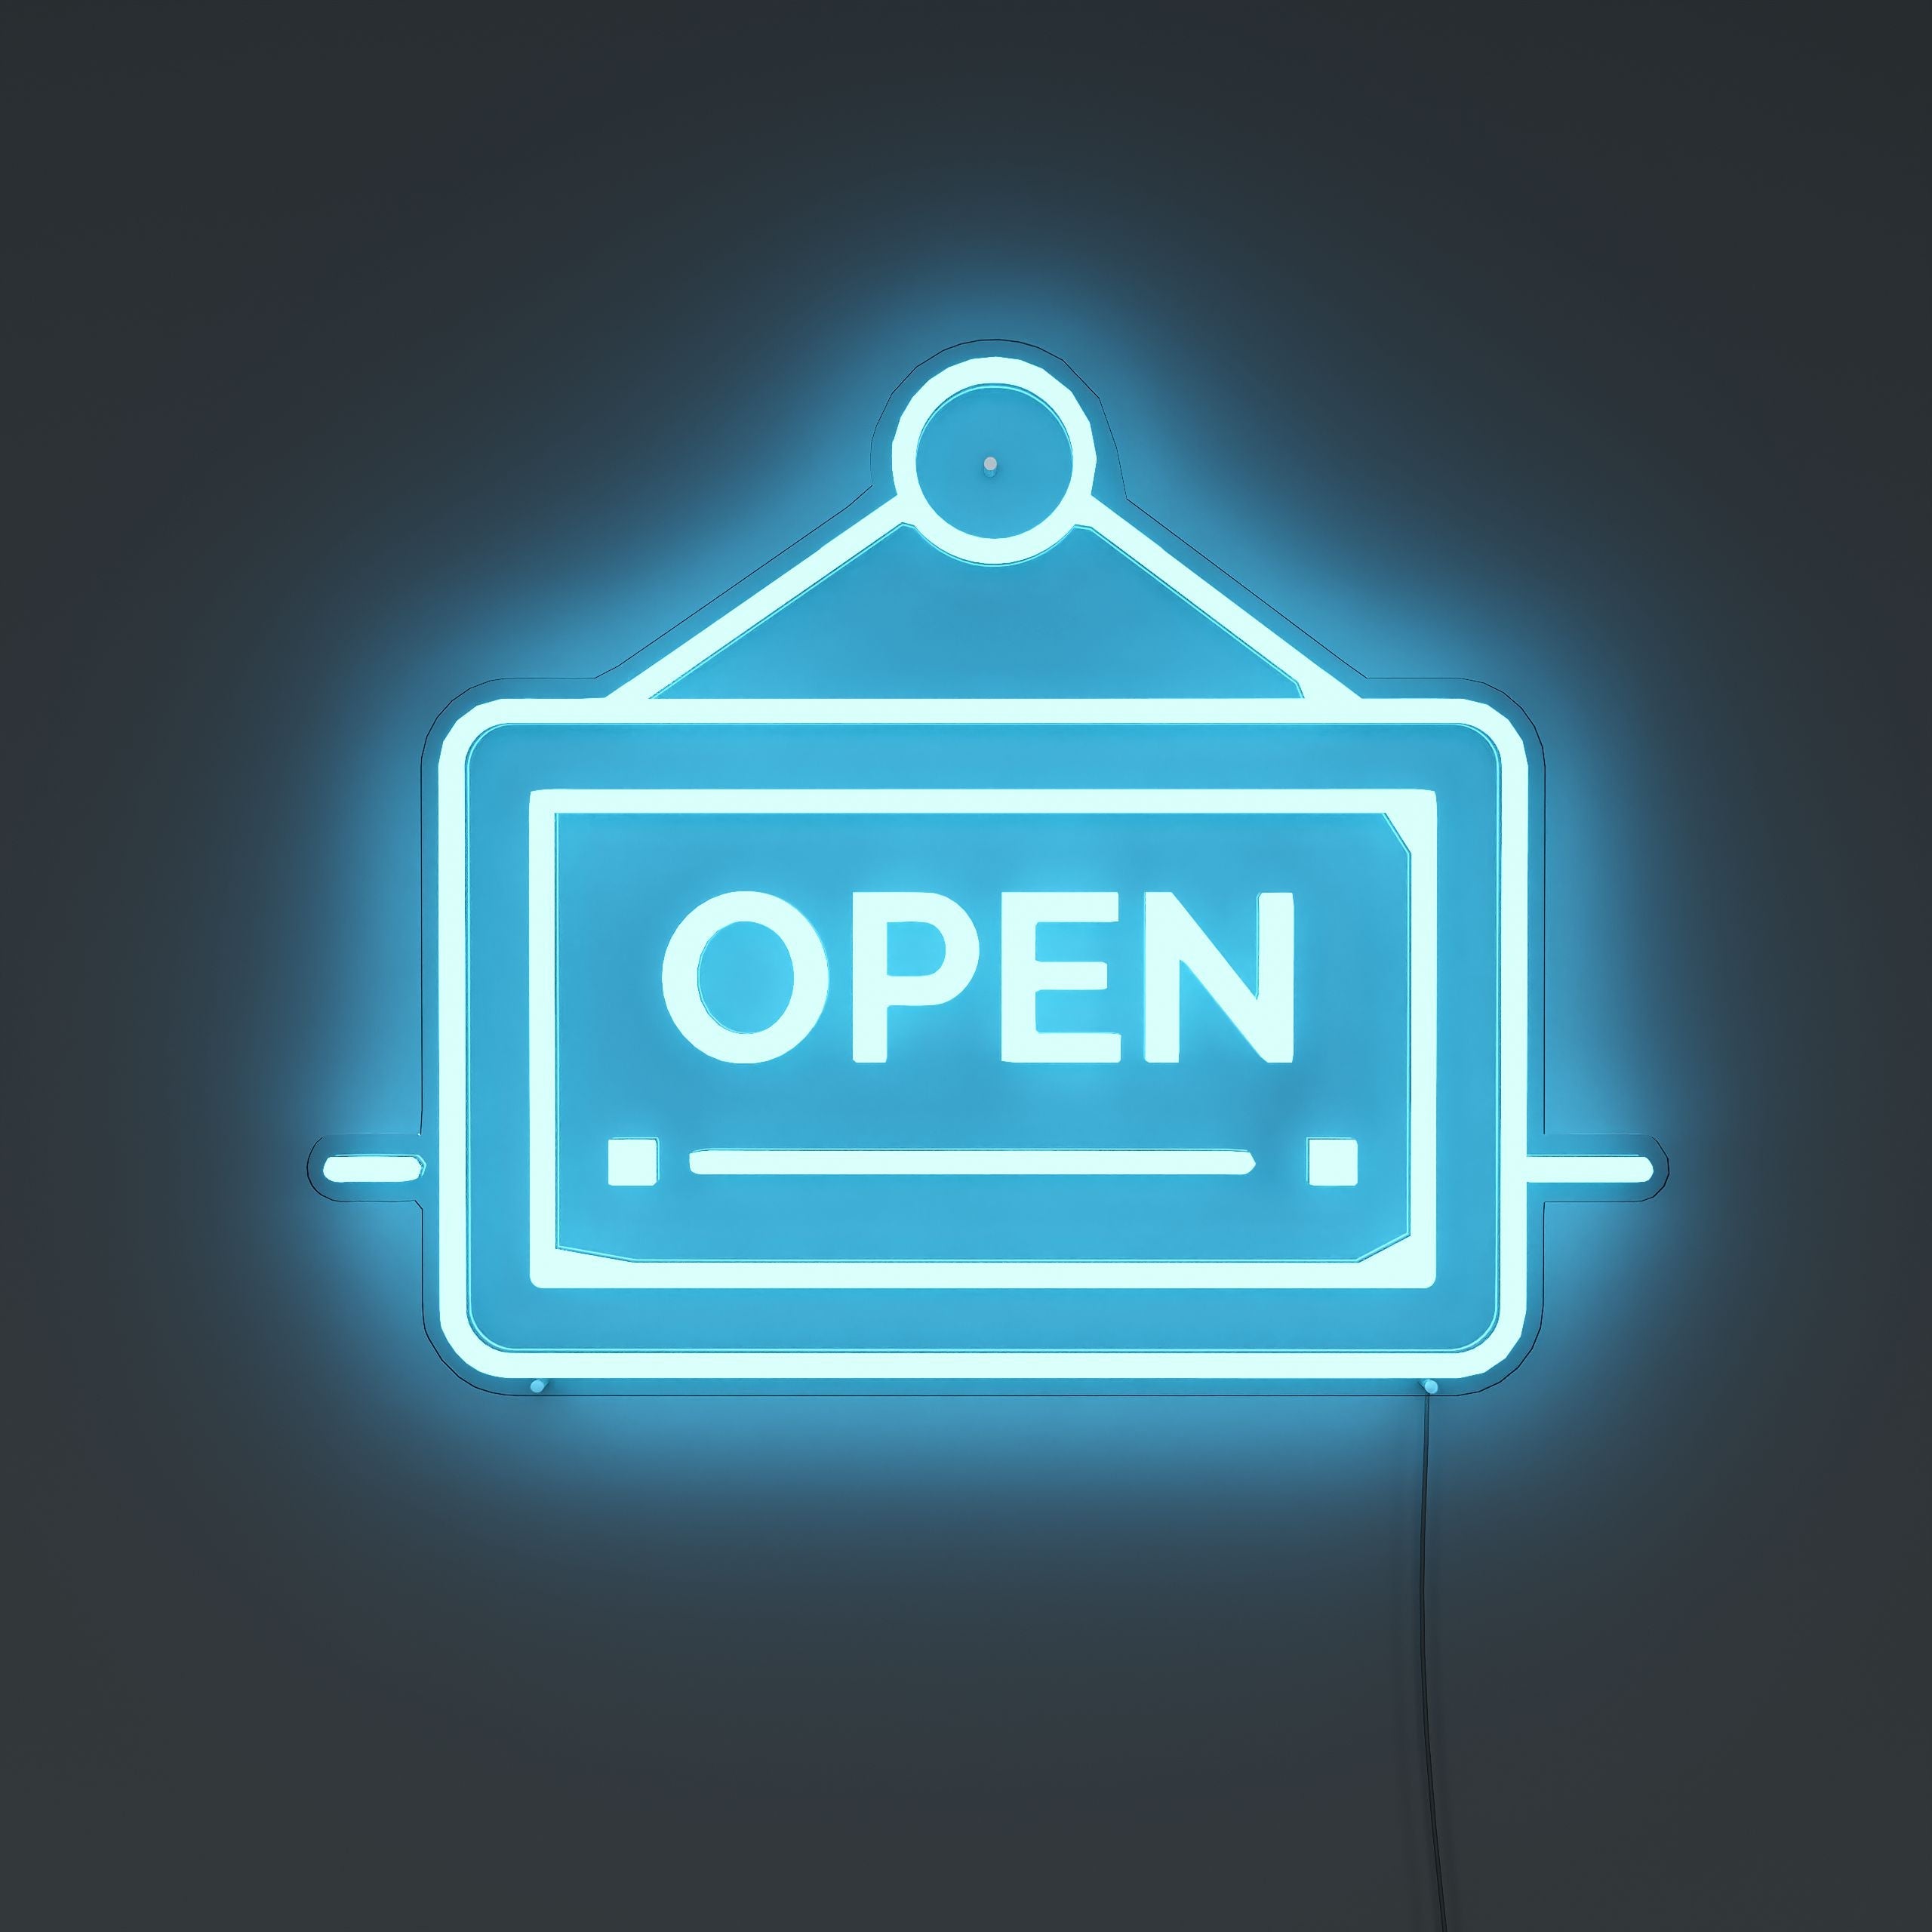 browse-openly-here-neon-sign-lite